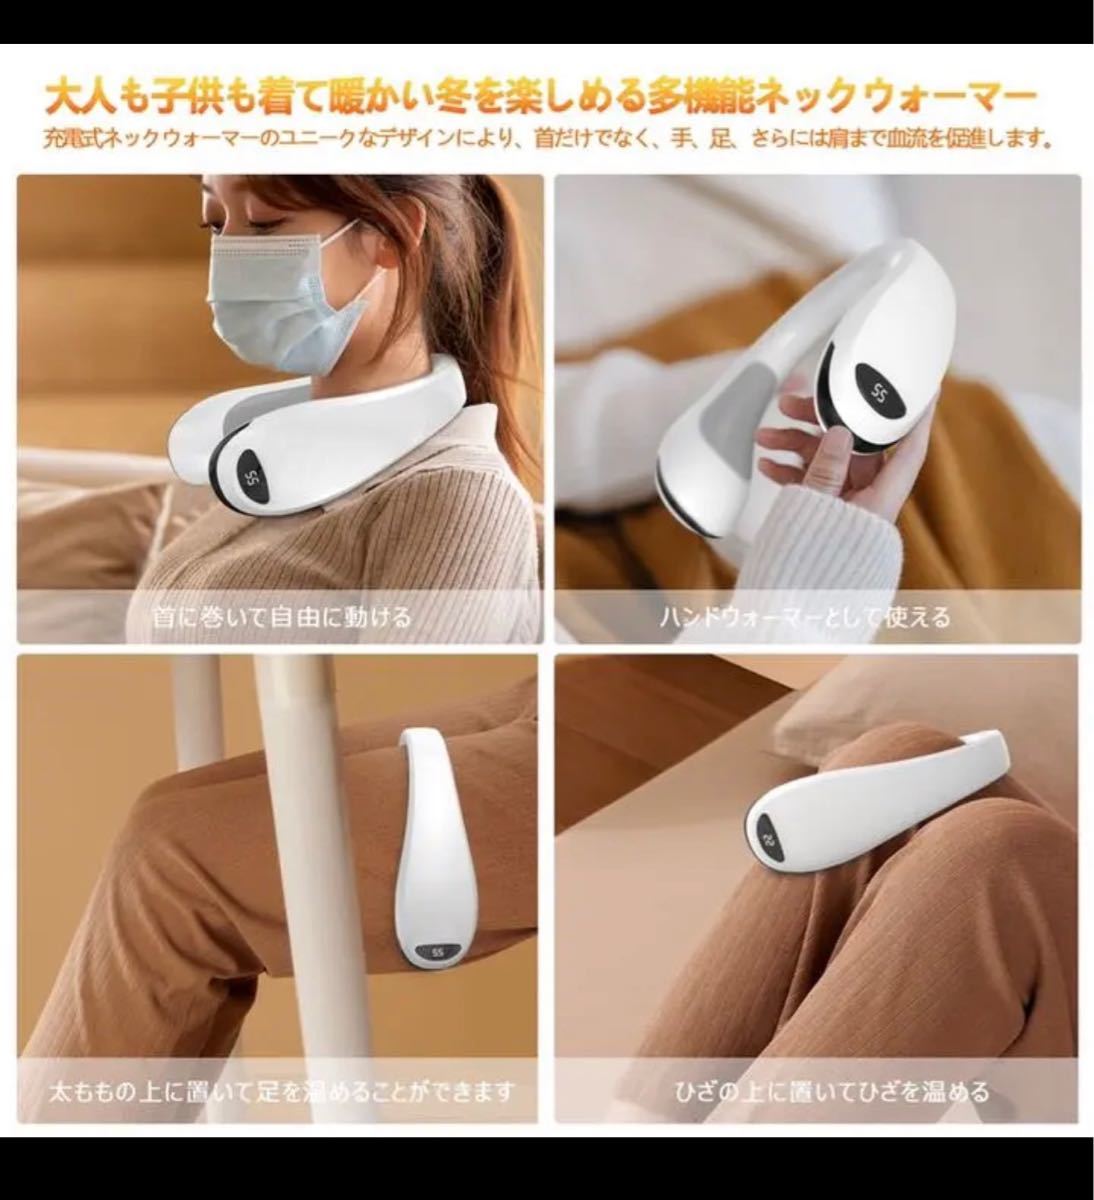 [ newest design ] neck warmer charge possibility rechargeable electric Cairo 3 stair temperature adjustment possibility neck .. mobile type hand warmer 